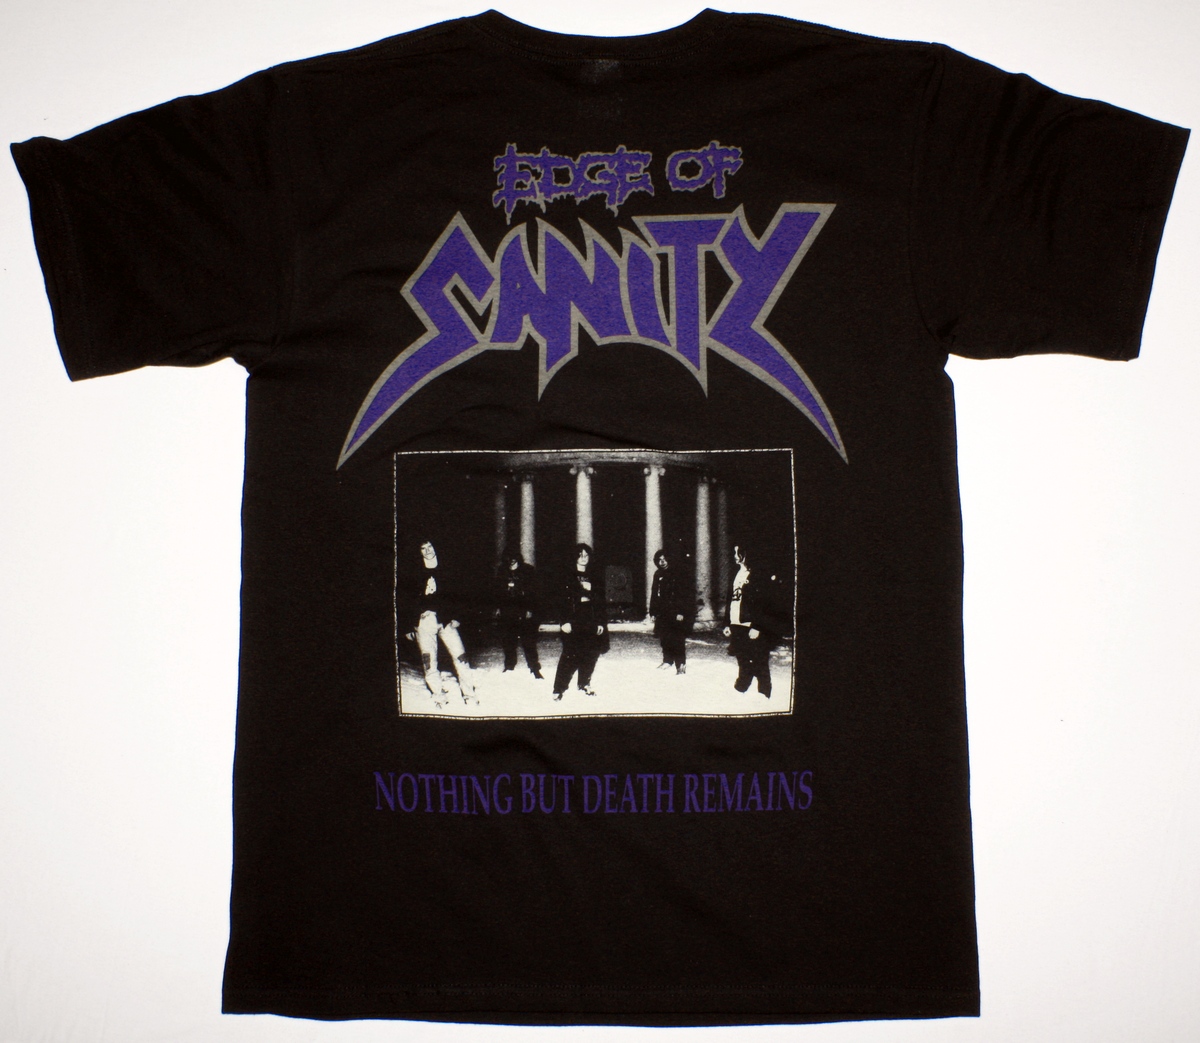 EDGE OF SANITY NOTHING BUT DEATH REMAINS 91 NEW BLACK T-SHIRT